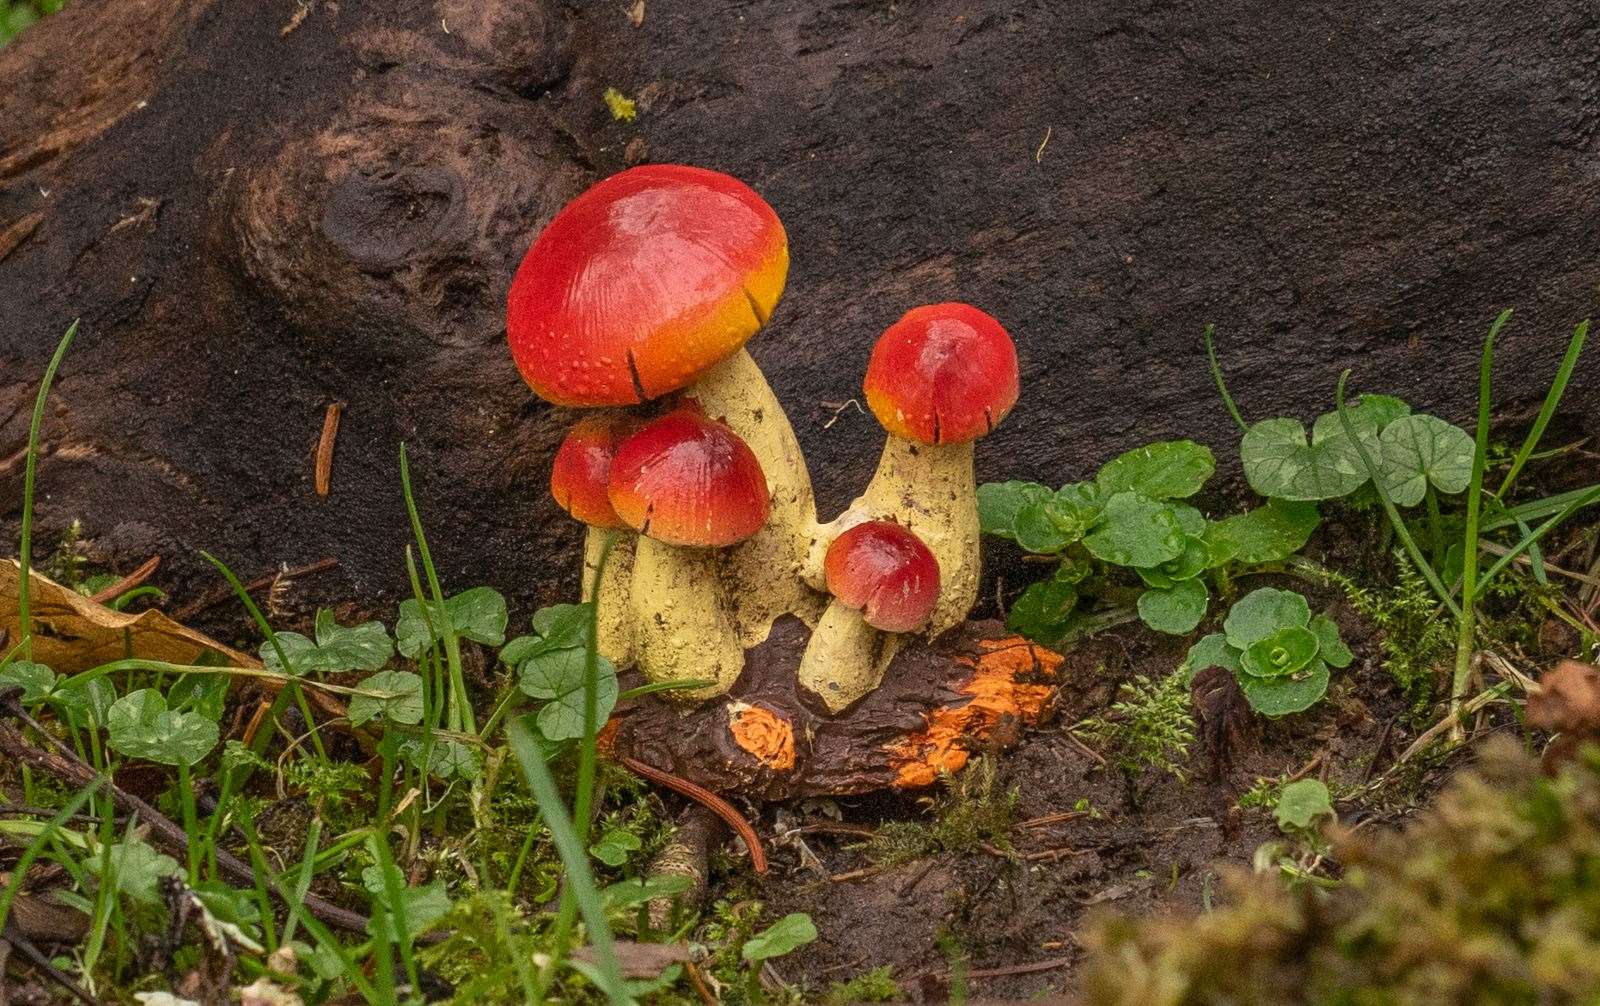 Julie Catterall focused on these fairy mushrooms in the Fairy Glen.